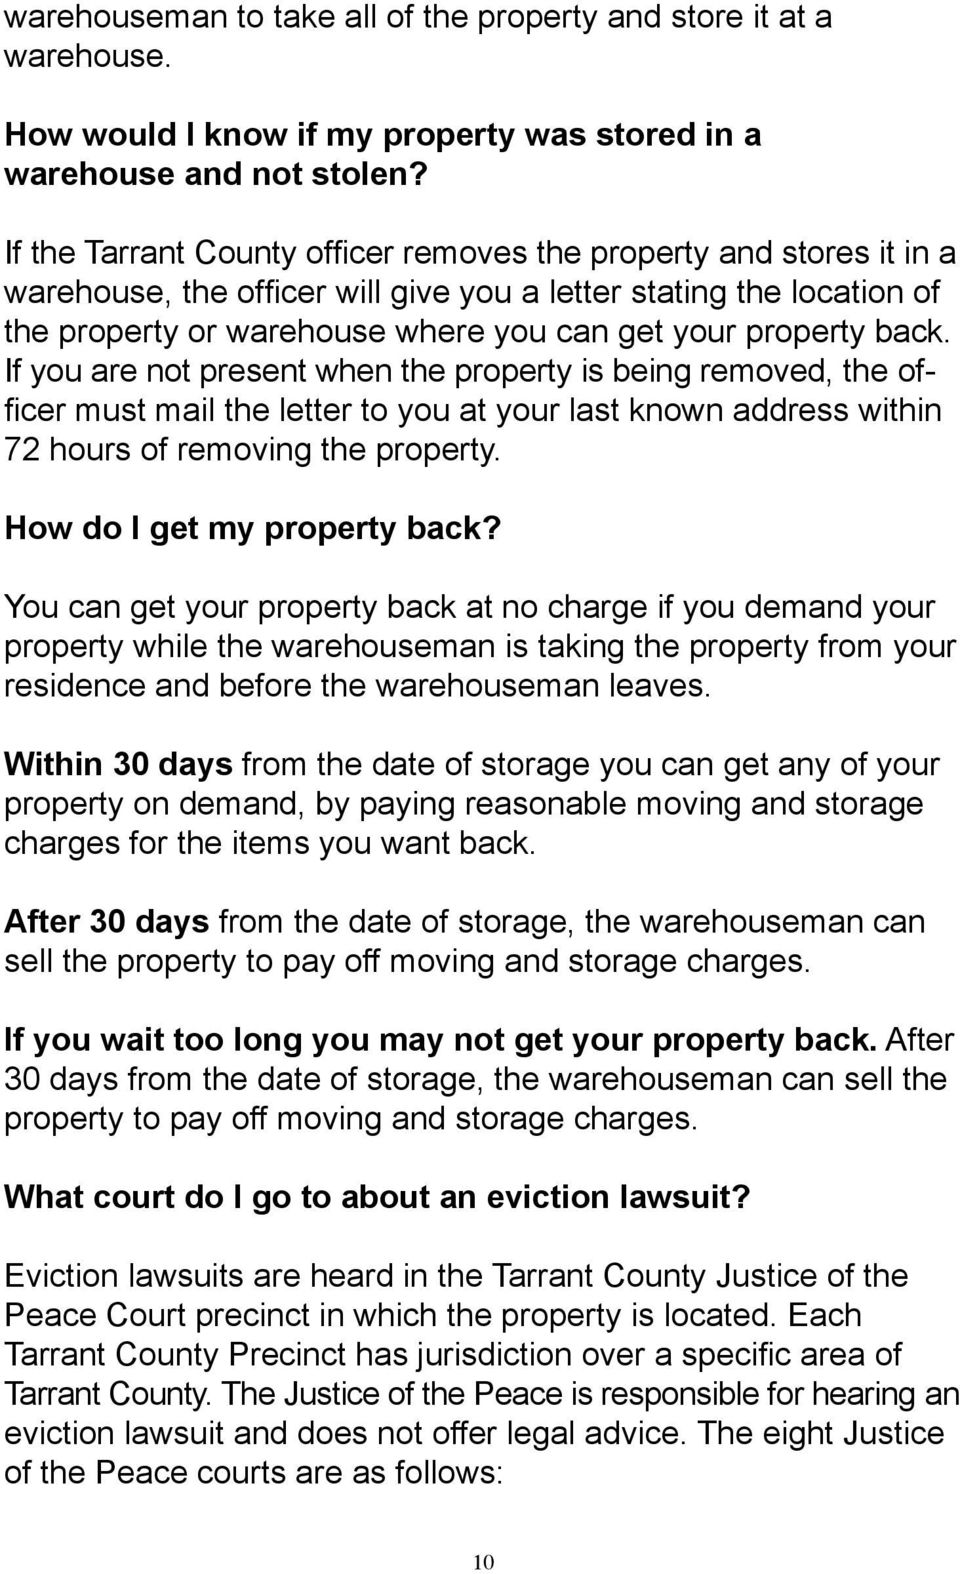 back. If you are not present when the property is being removed, the officer must mail the letter to you at your last known address within 72 hours of removing the property.